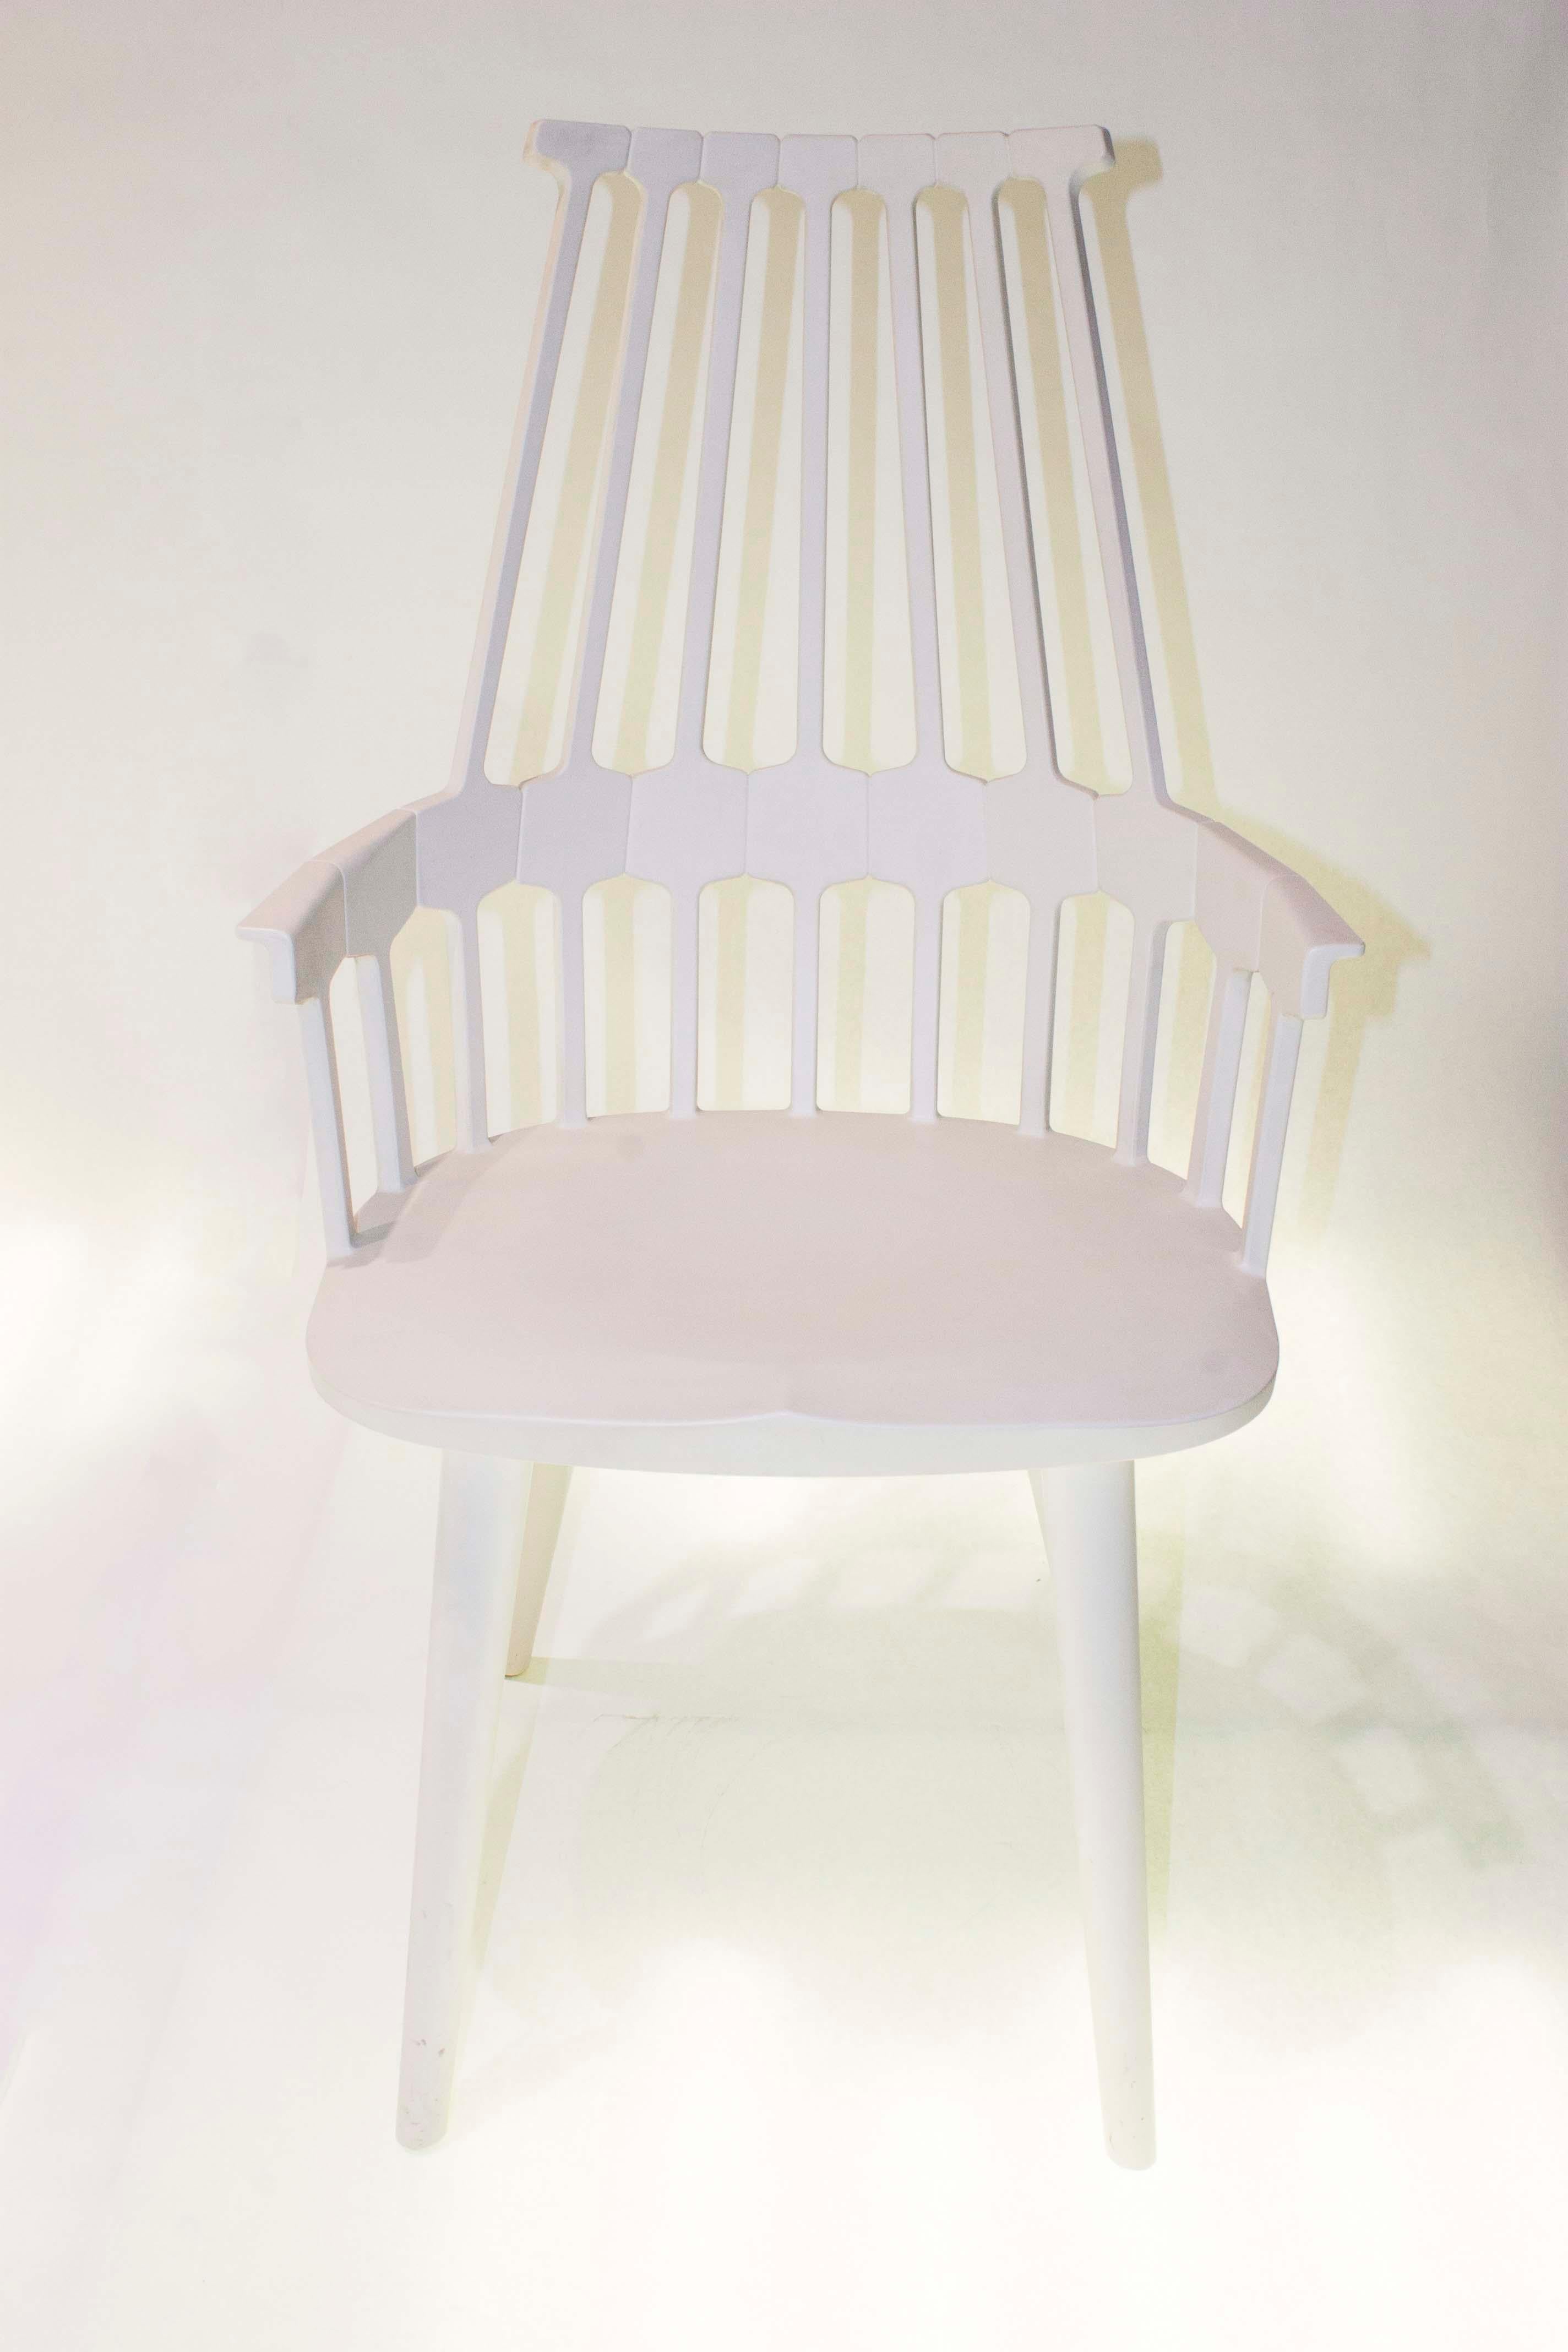 Modern Set of 2 Kartell Comback Chairs in White with White Legs by Patricia Urquiola